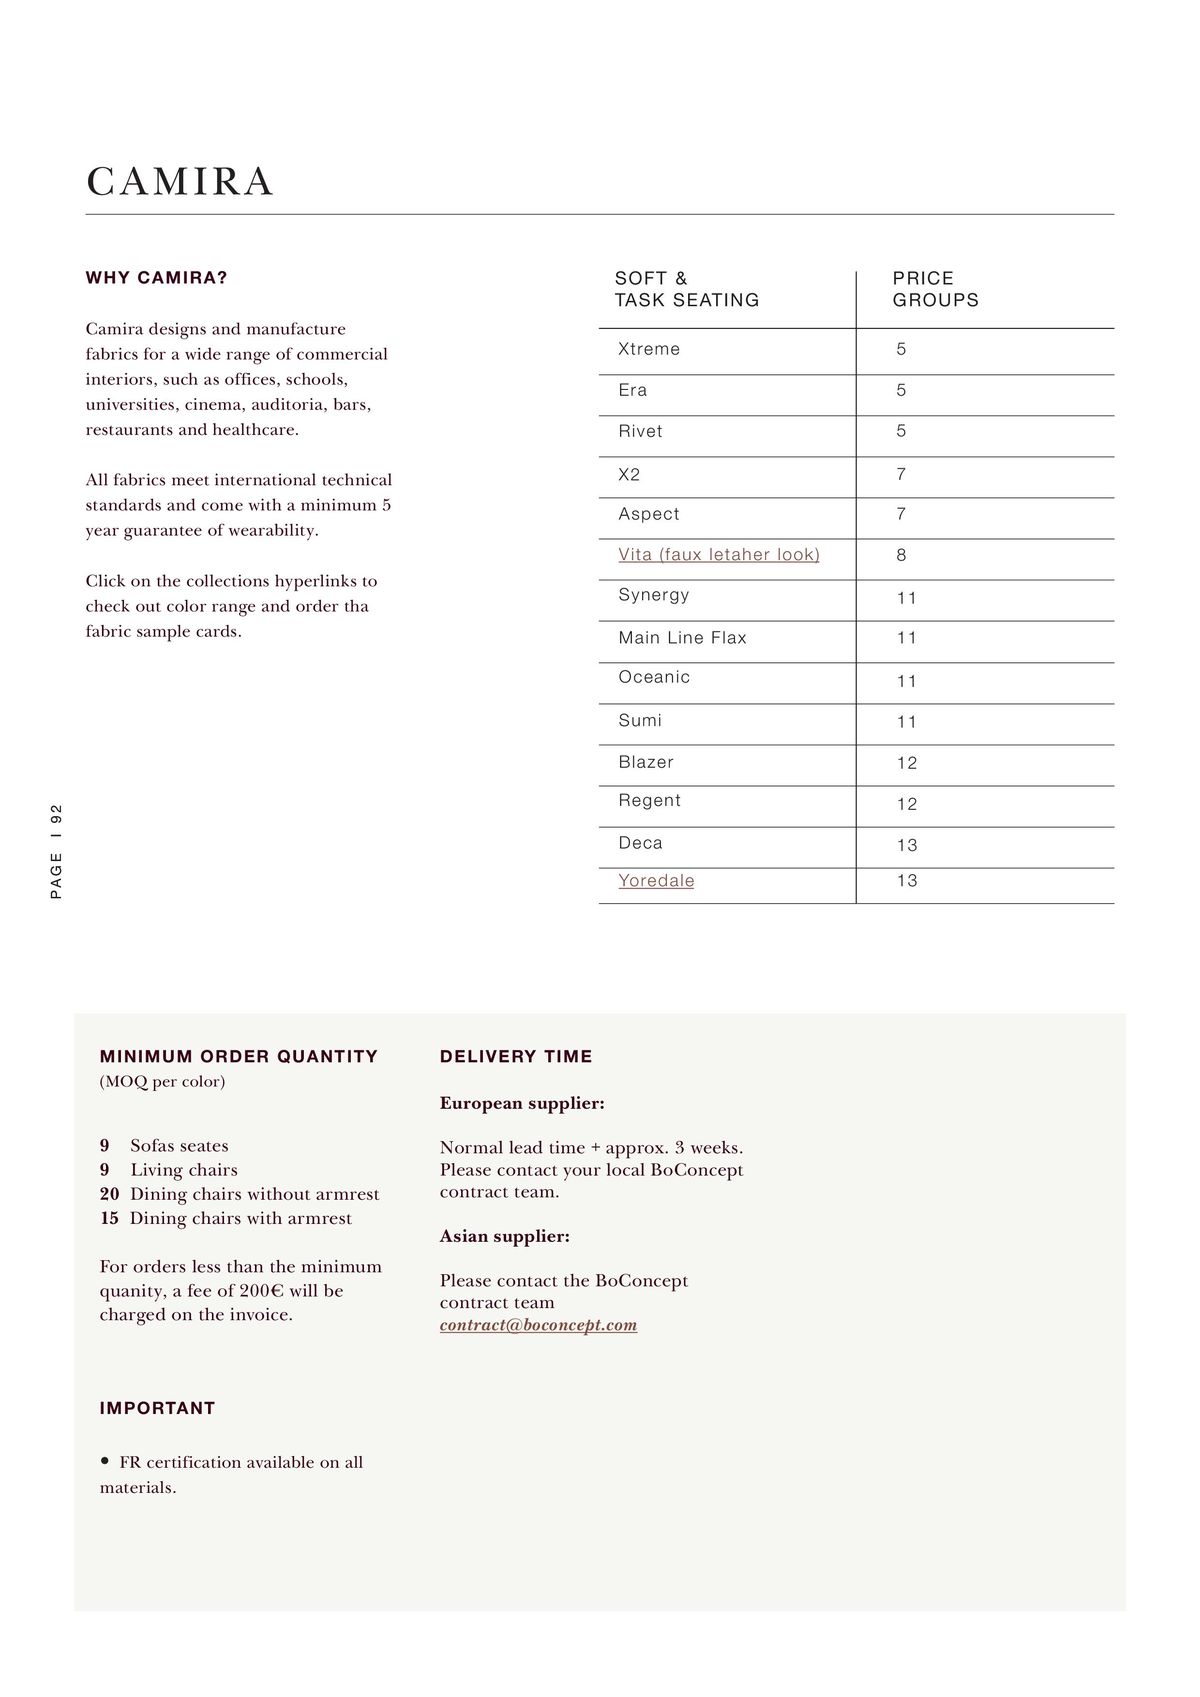 Catalogue Explore our contract materials guide, page 00092